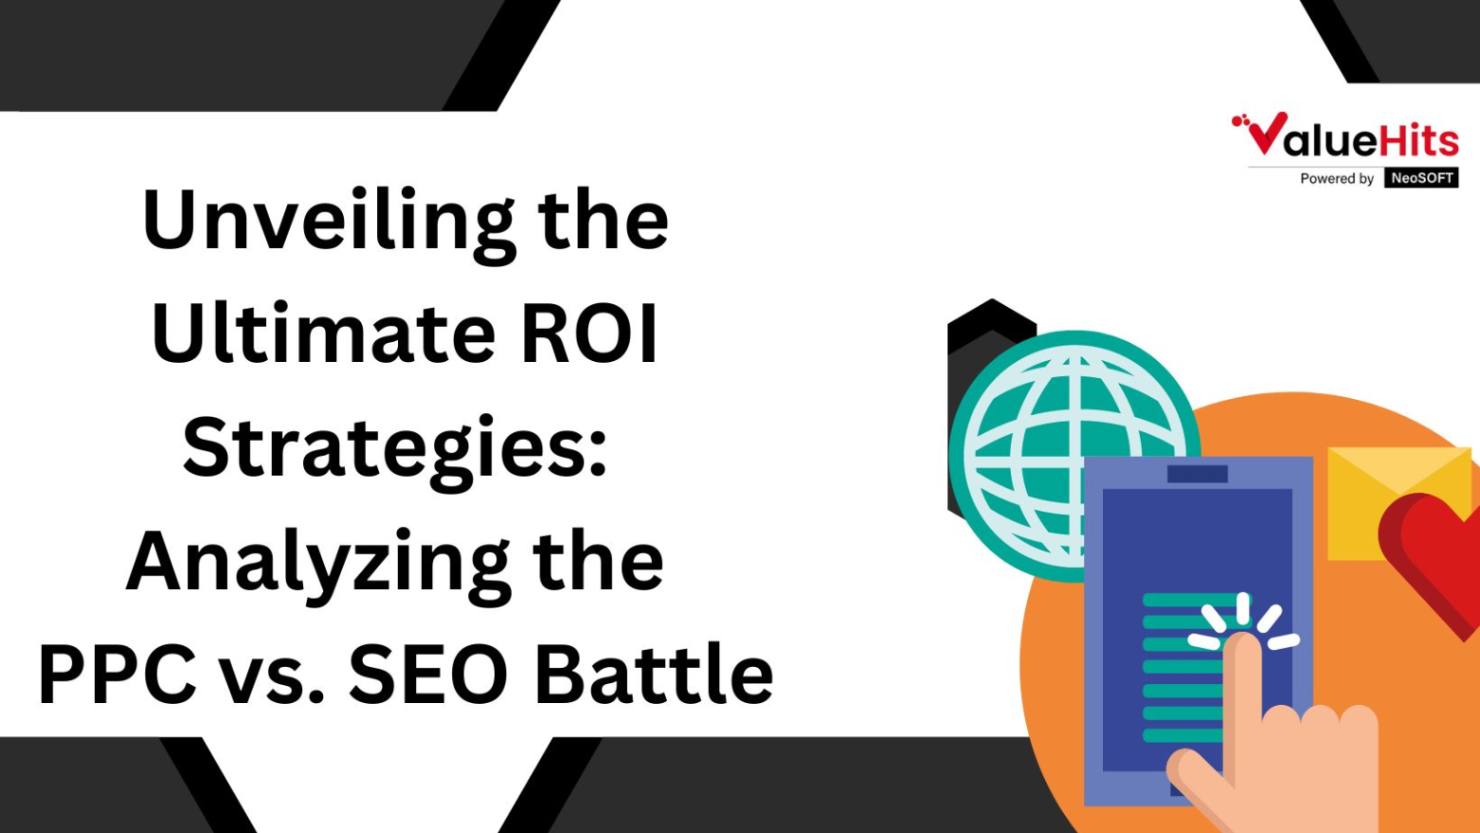 Unveiling the Ultimate ROI Strategies: Analyzing the PPC vs. SEO Battle